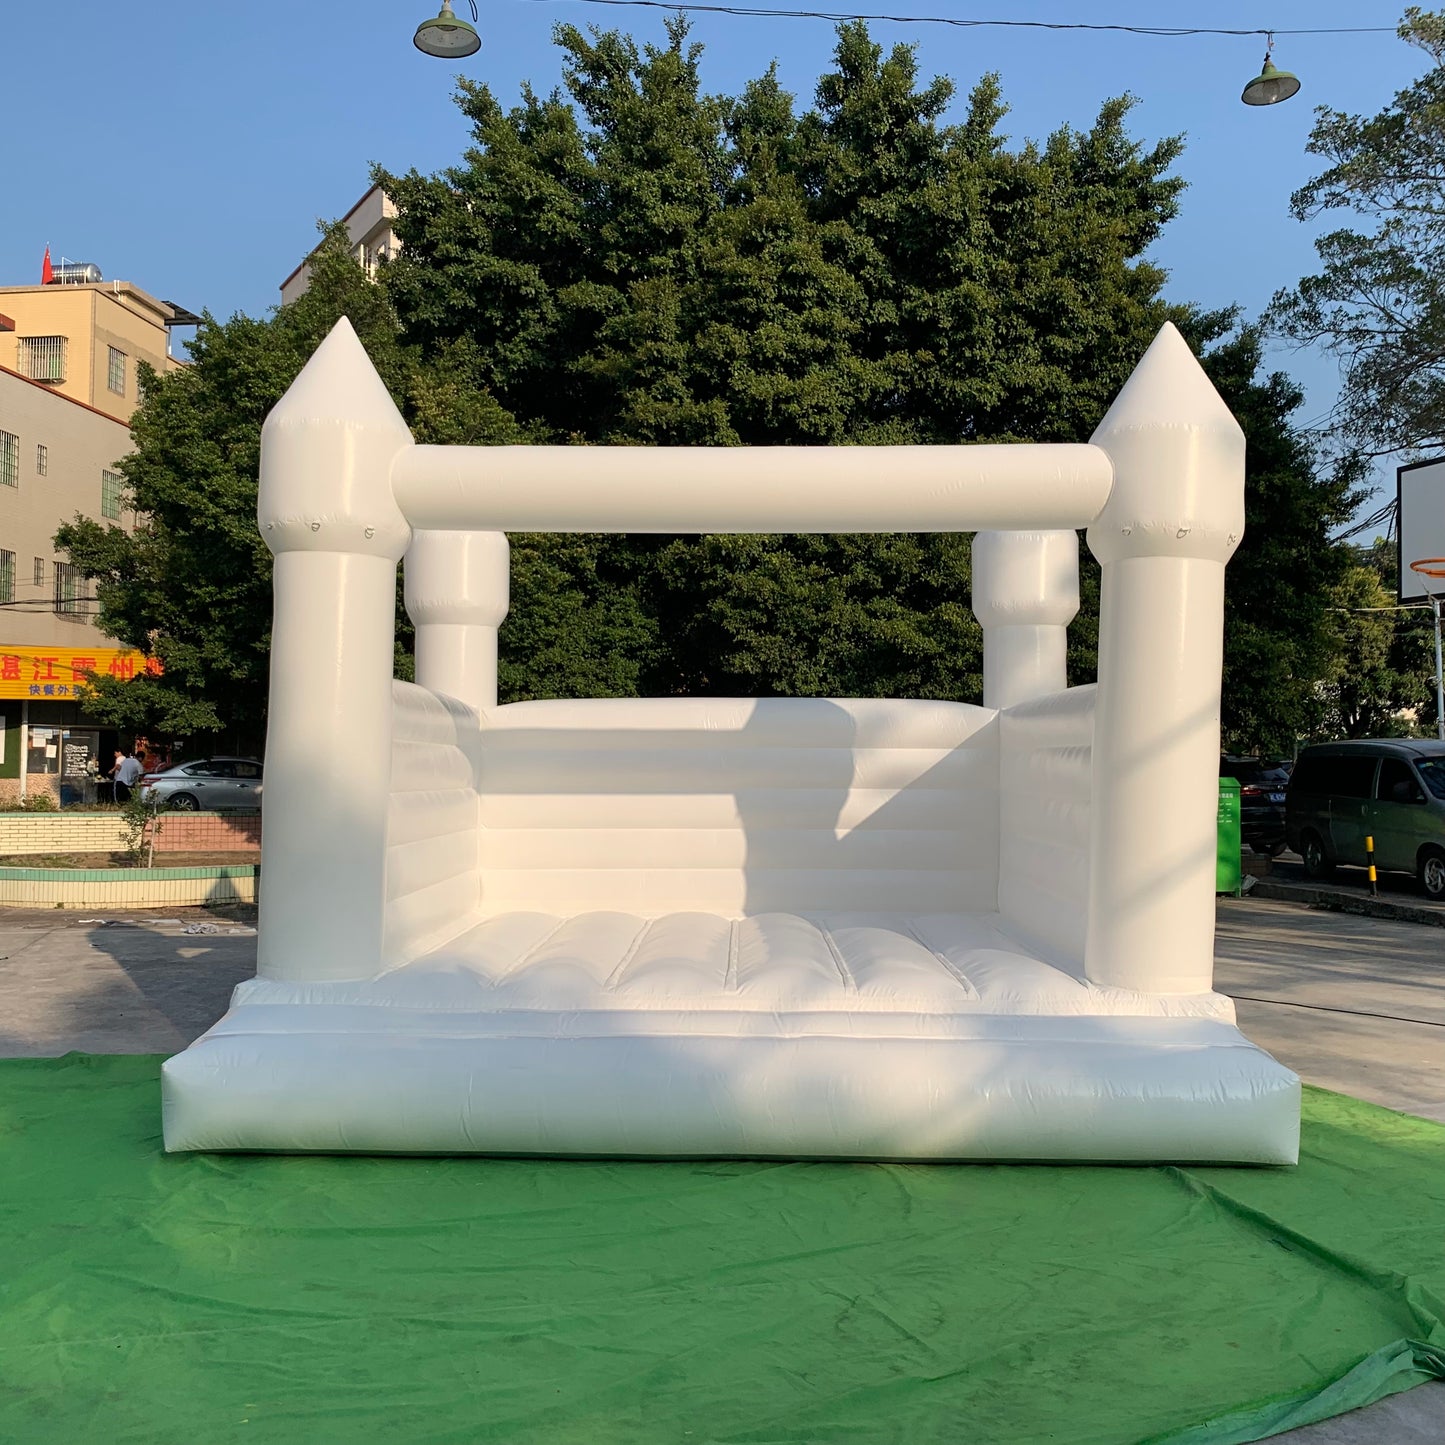 White Bounce House Inflatable For Sale